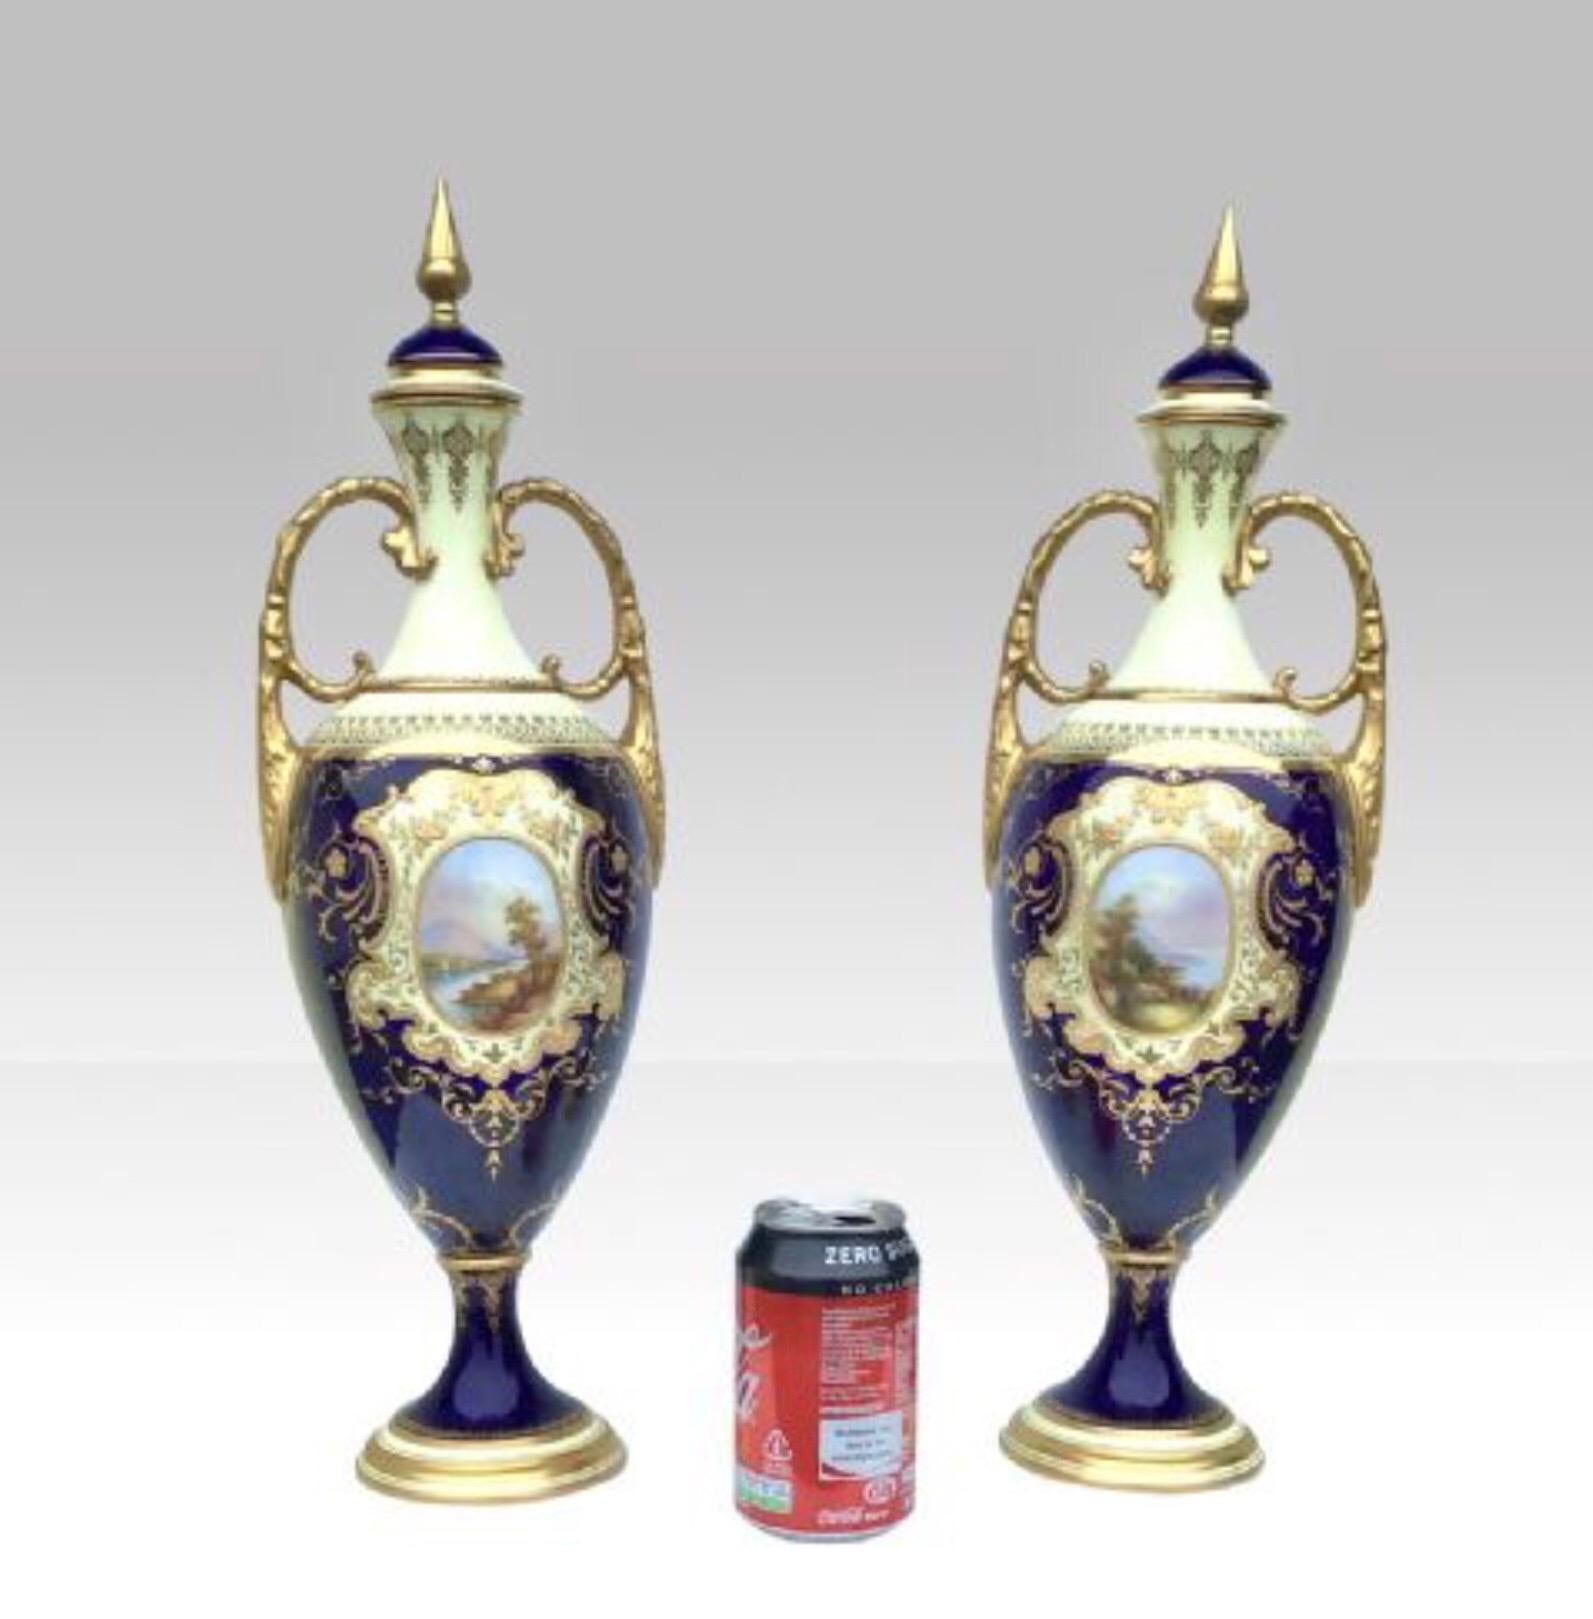 A magnificent pair of tall antique Coalport Porcelain vases, of baluster form with original covers and twin-scroll handles, painted with landscape panels on cobalt blue and lemon grounds highlighted in gilt, printed marks.
46.5cm high.